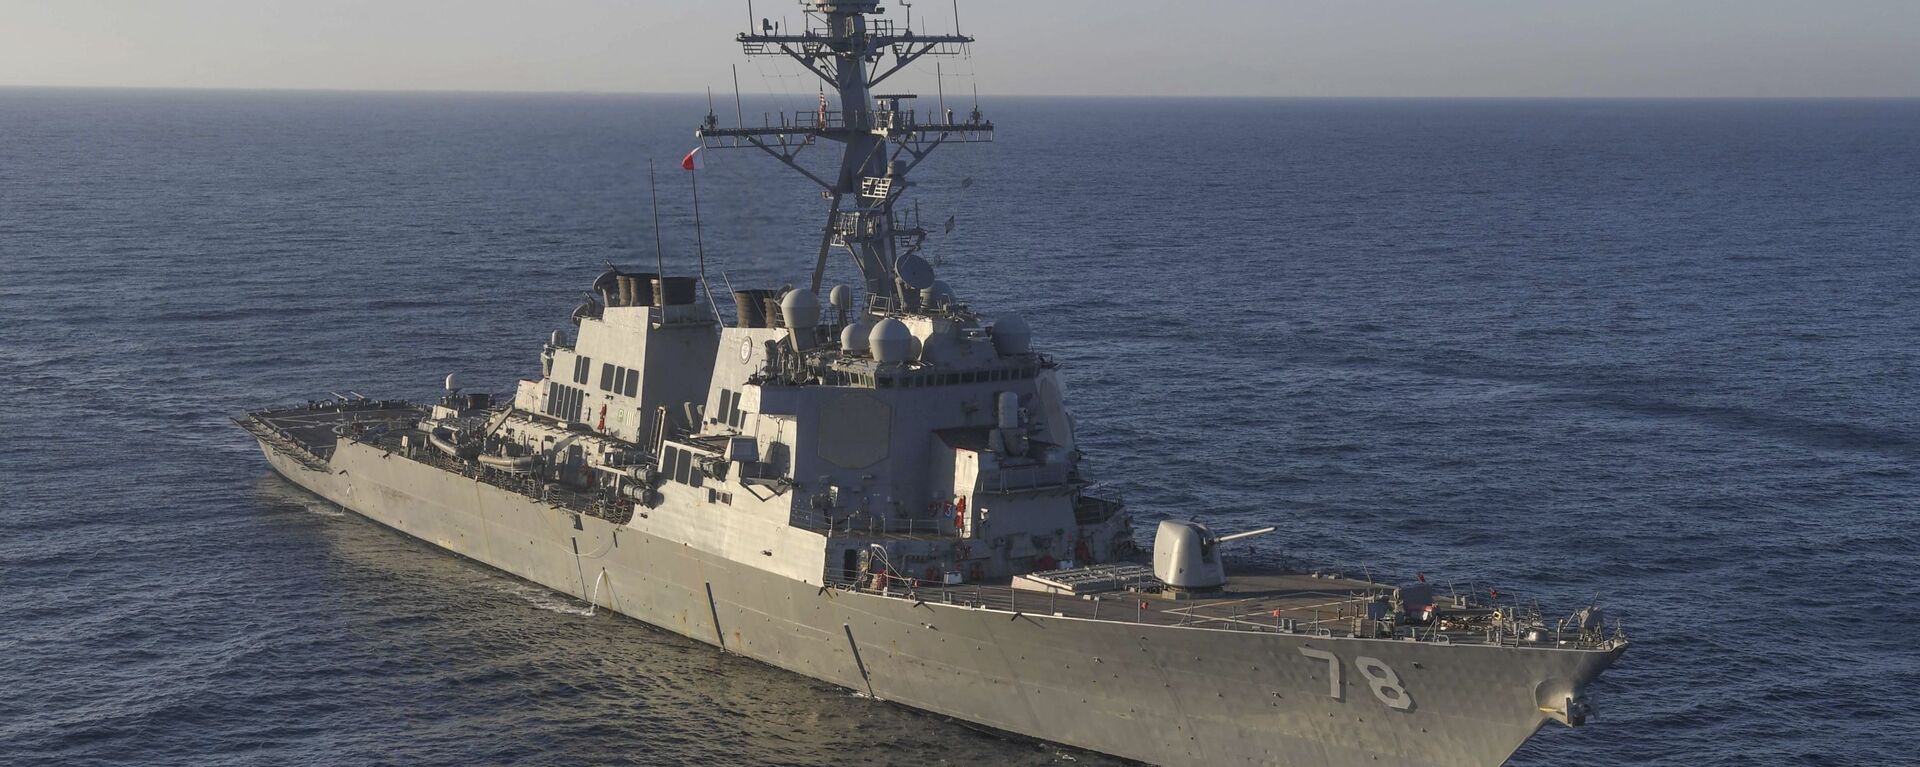 In this image provided by the U.S. Navy, the guided-missile destroyer USS Porter (DDG 78) transits the Mediterranean Sea on March 9, 2017 - Sputnik International, 1920, 28.01.2021